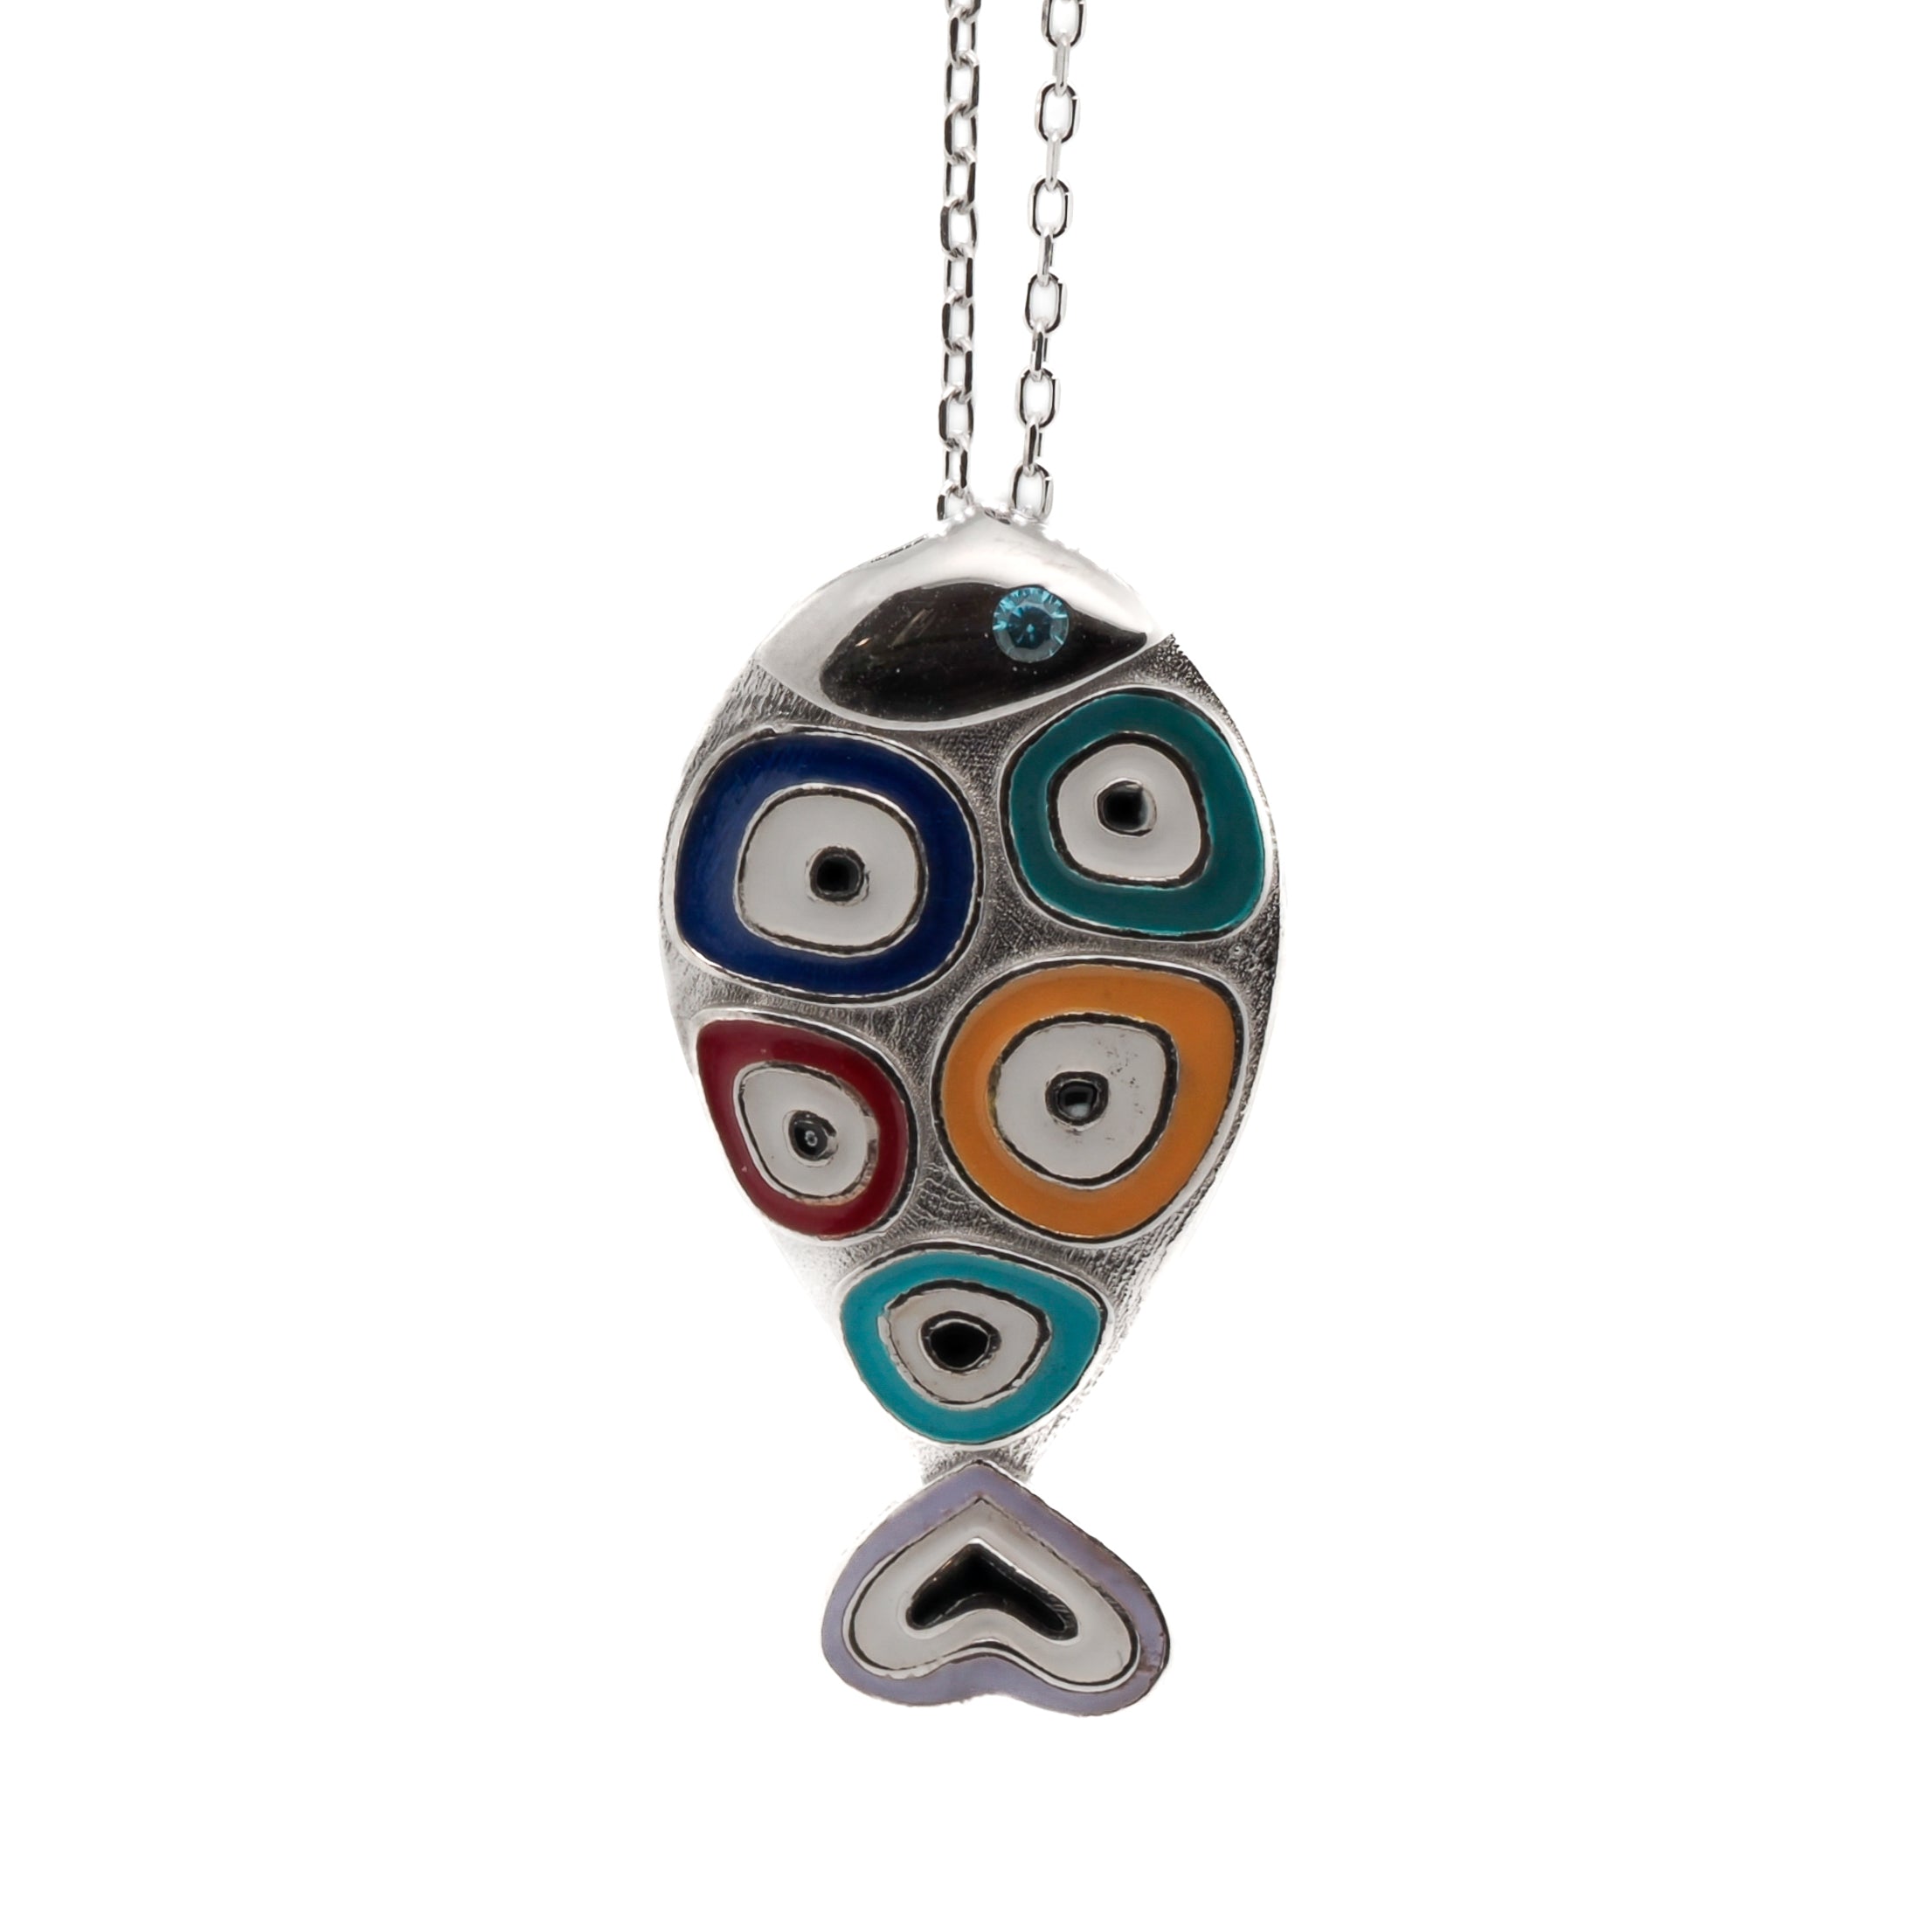 The Silver Evil Eye Fish Necklace, a stunning handmade piece with a symbolic Fish pendant and intricate evil eye designs.